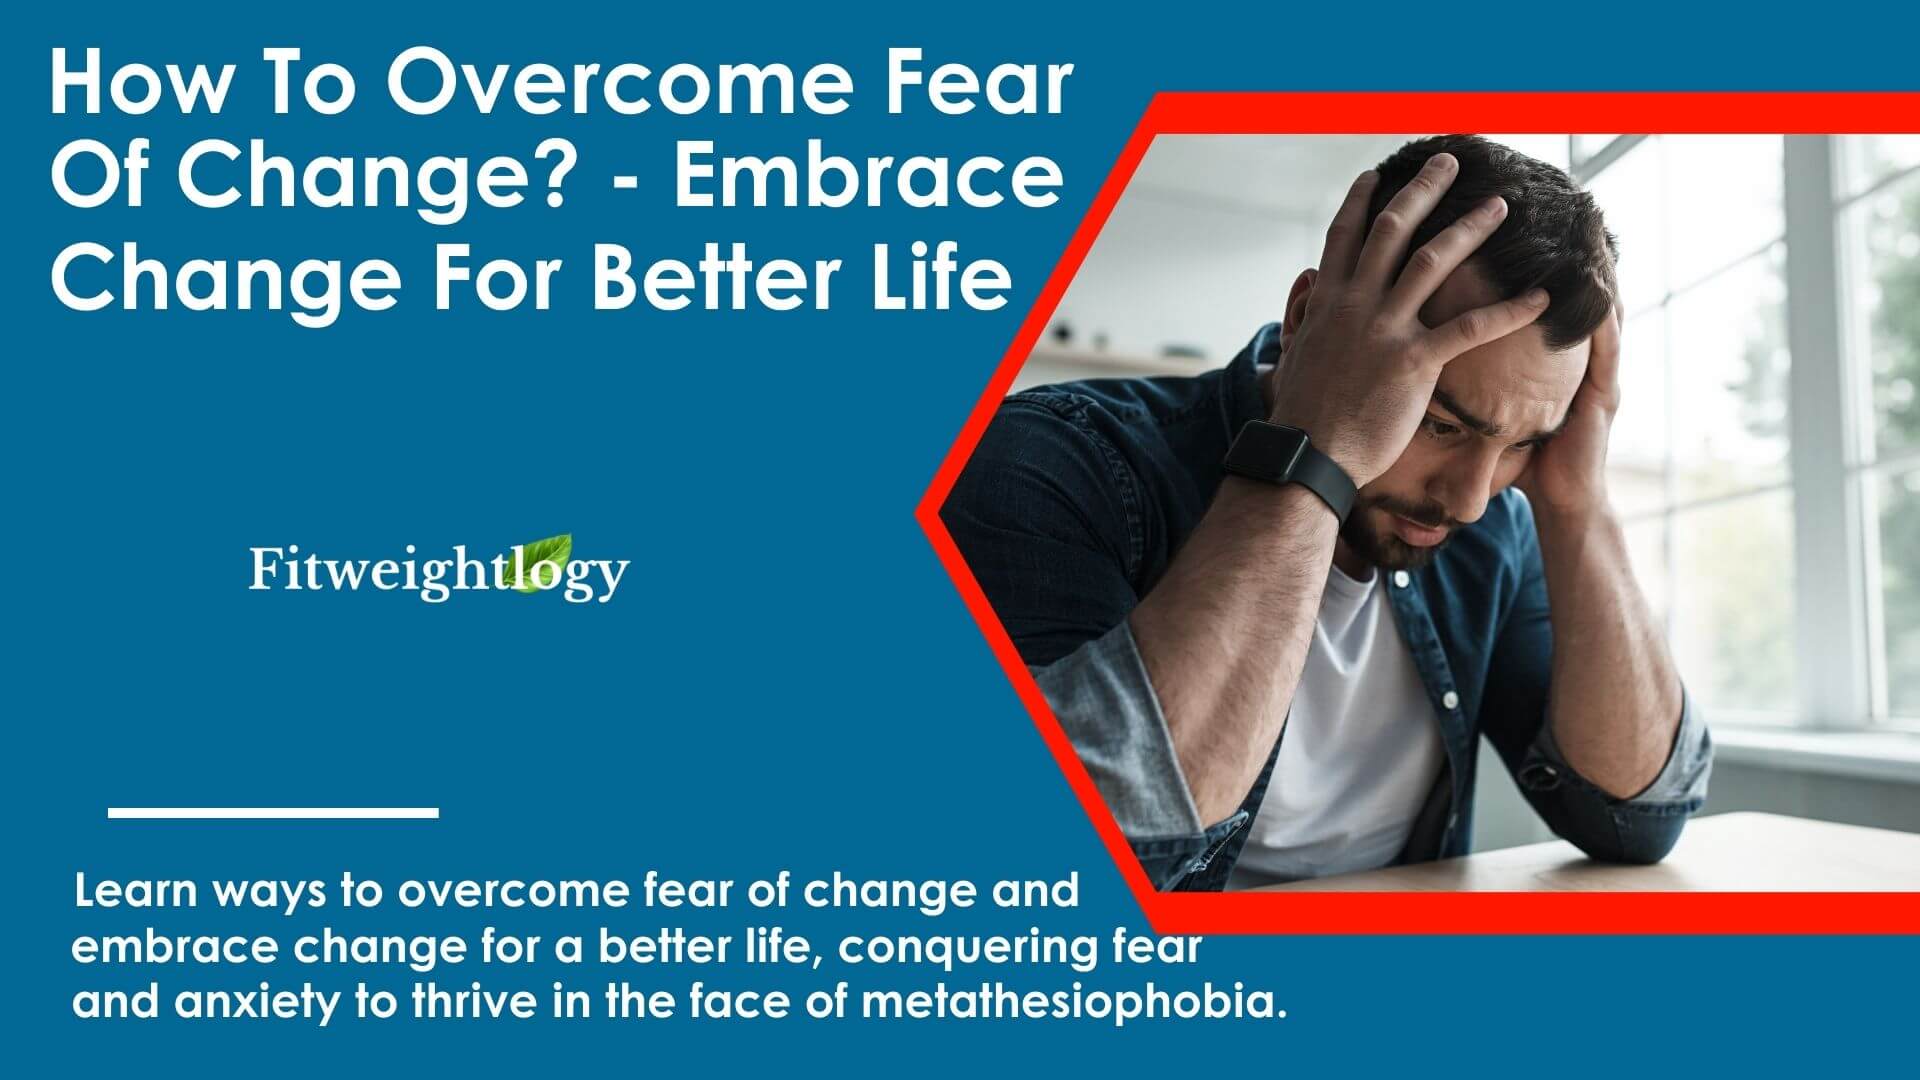 How To Overcome Fear of Change - Embrace Change And Fitweightlogy - Overcome Fear And Anxiety For A Better Life